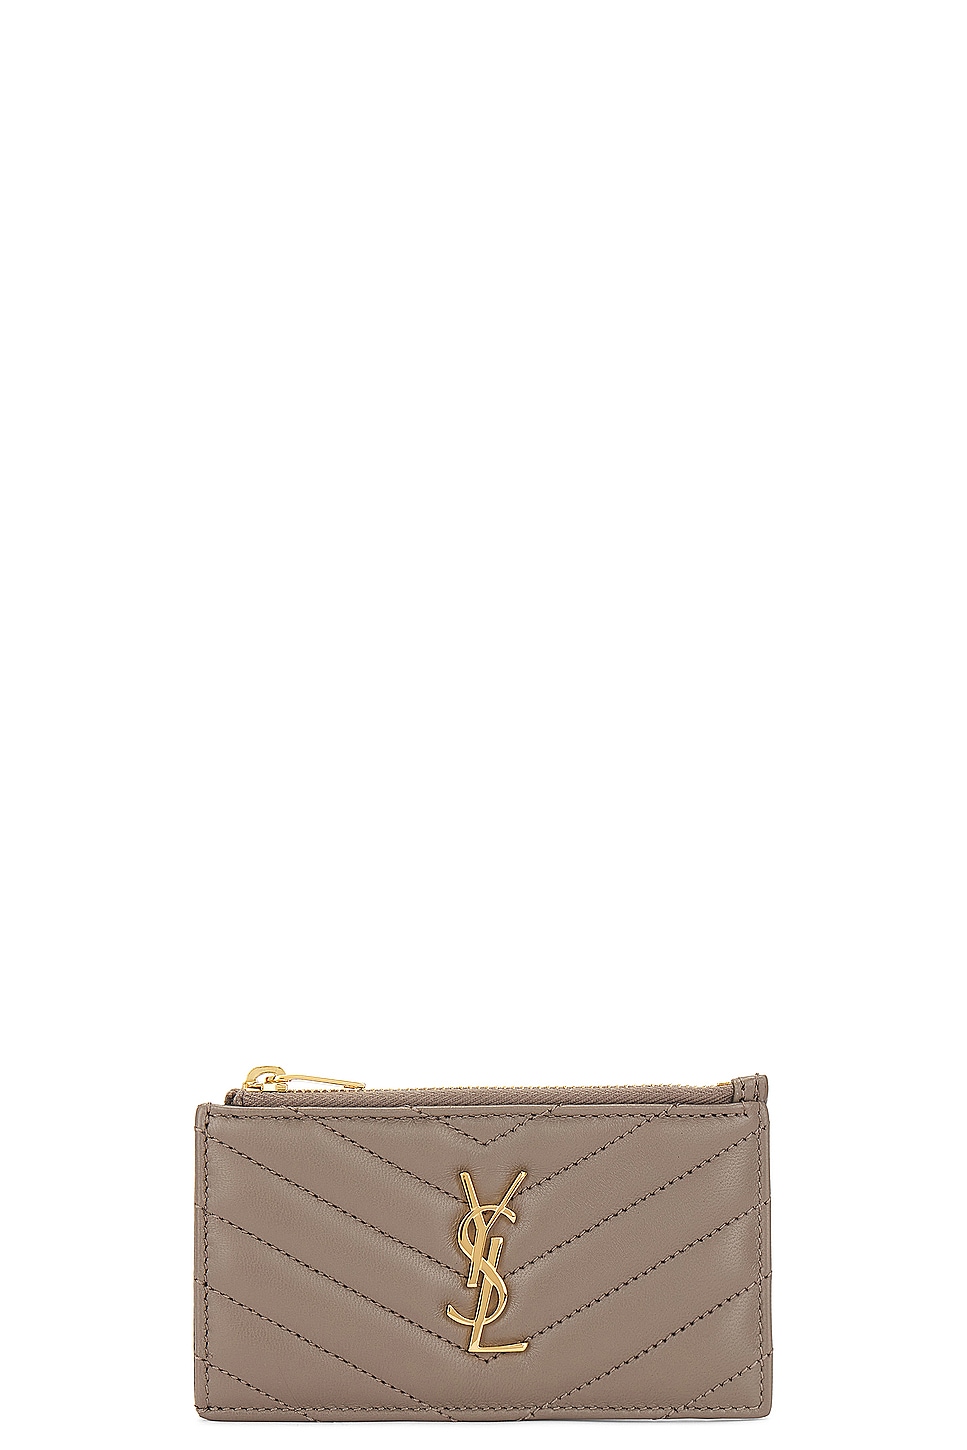 Cassandre Fragments Zipped Card Case in Taupe